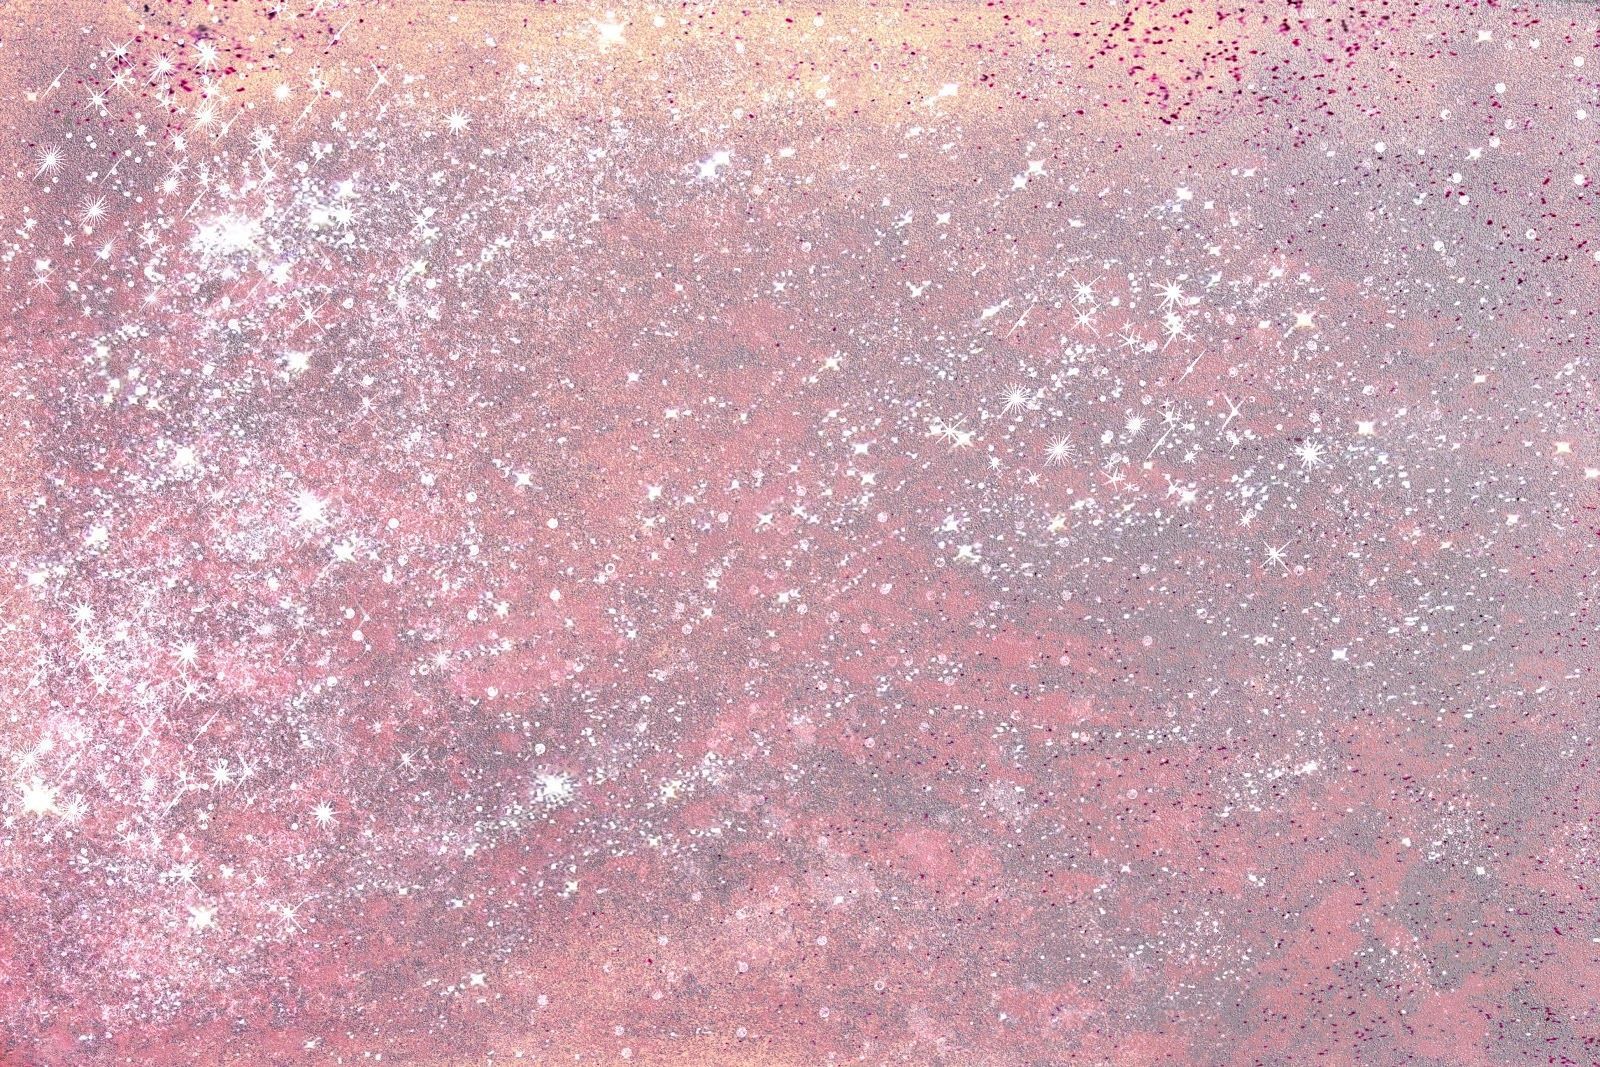 A pink and purple painting with white speckles. - Glitter